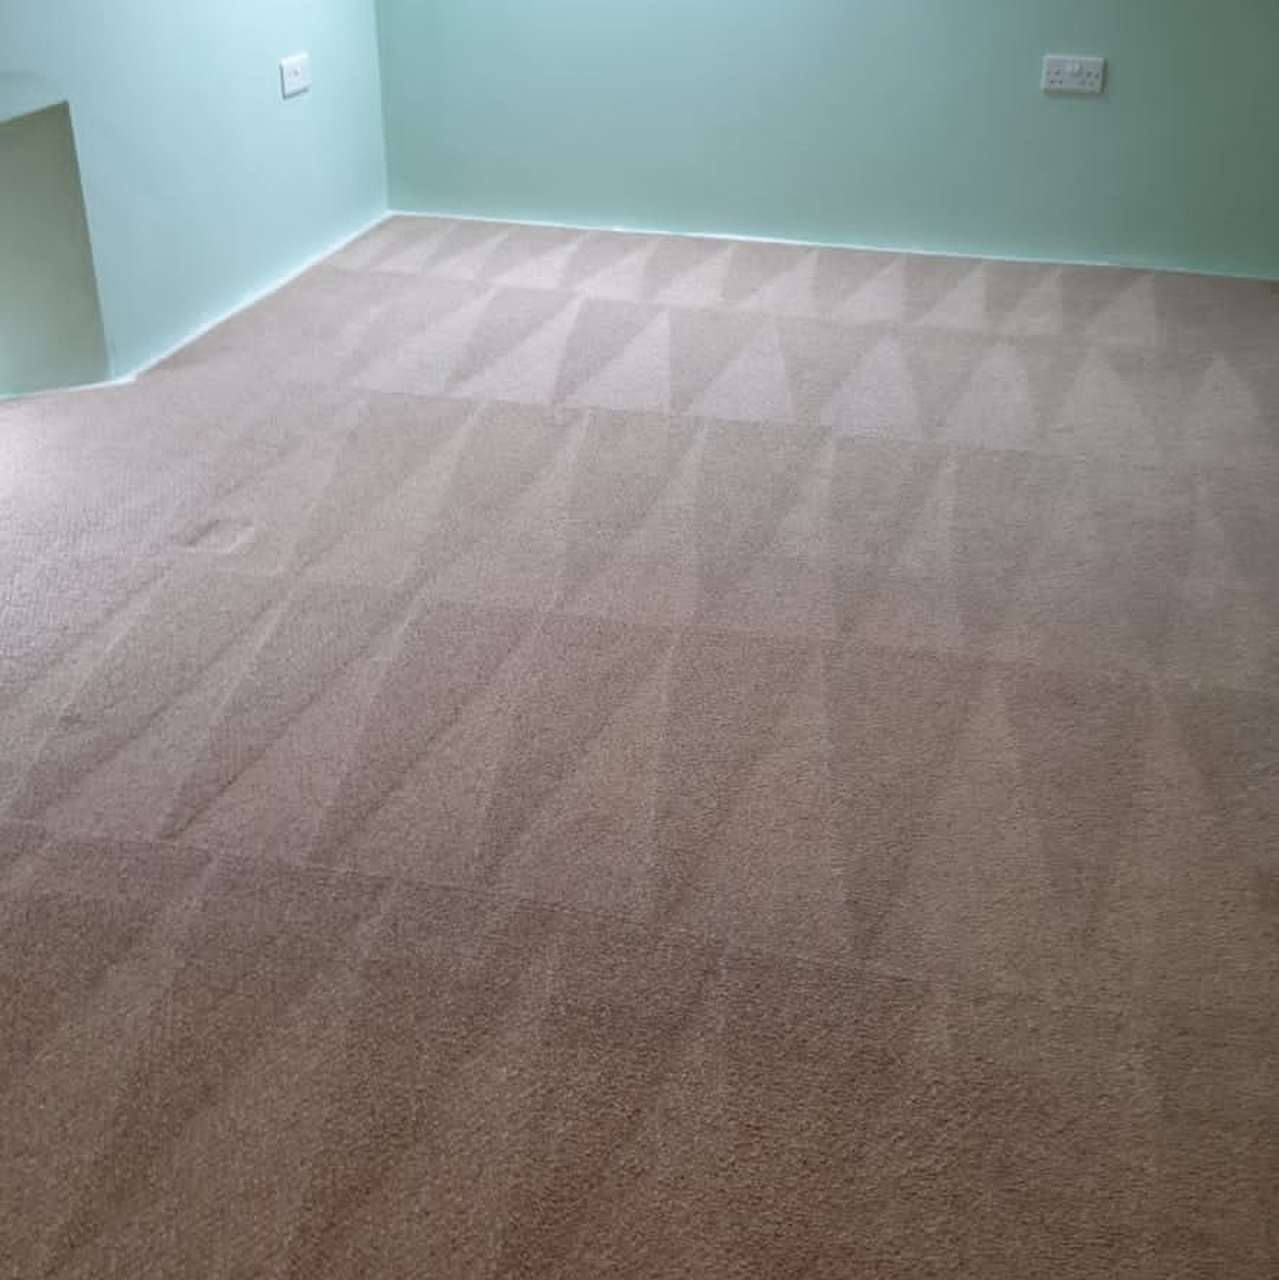 Carpet cleaned in home